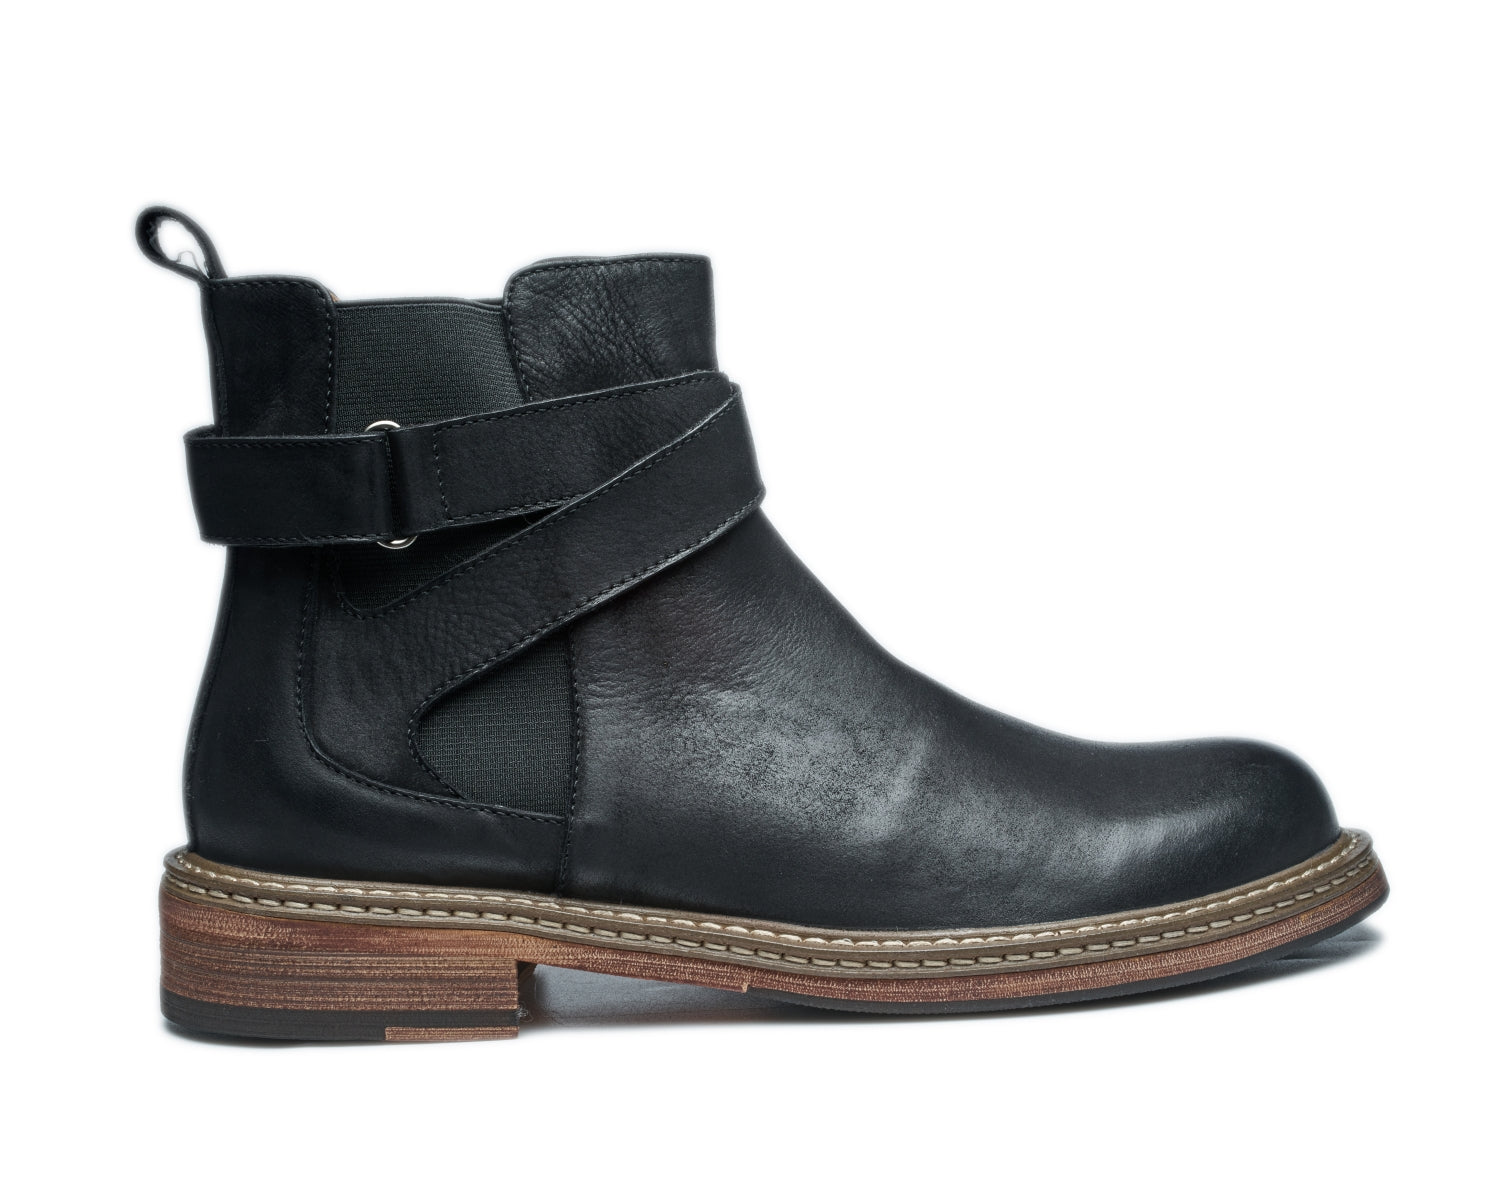 Men's Goodyear Leather Welt Chelsea Boots with Buckle, stylish old skin boots for fashion8